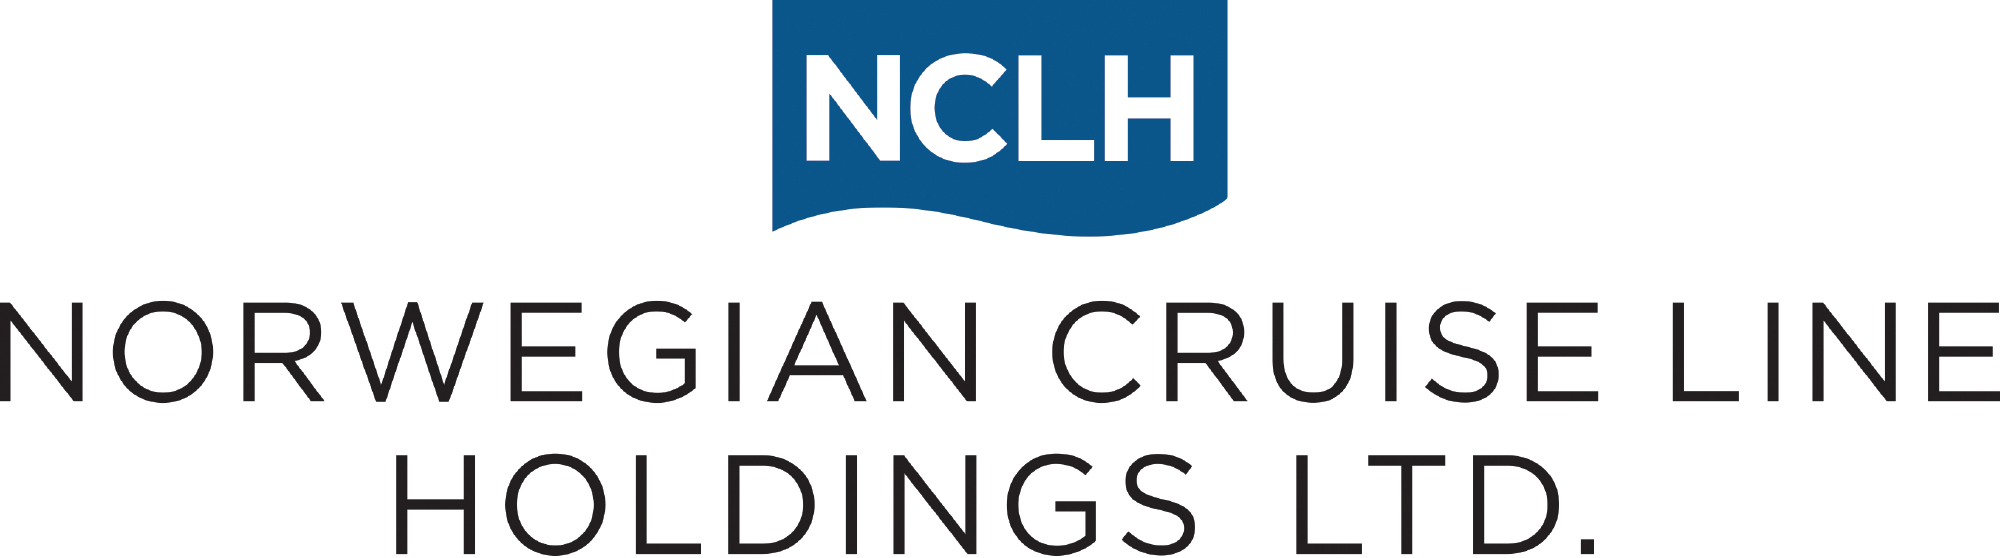 NCLH gets $400 million L Catterton investment, offers stock, notes